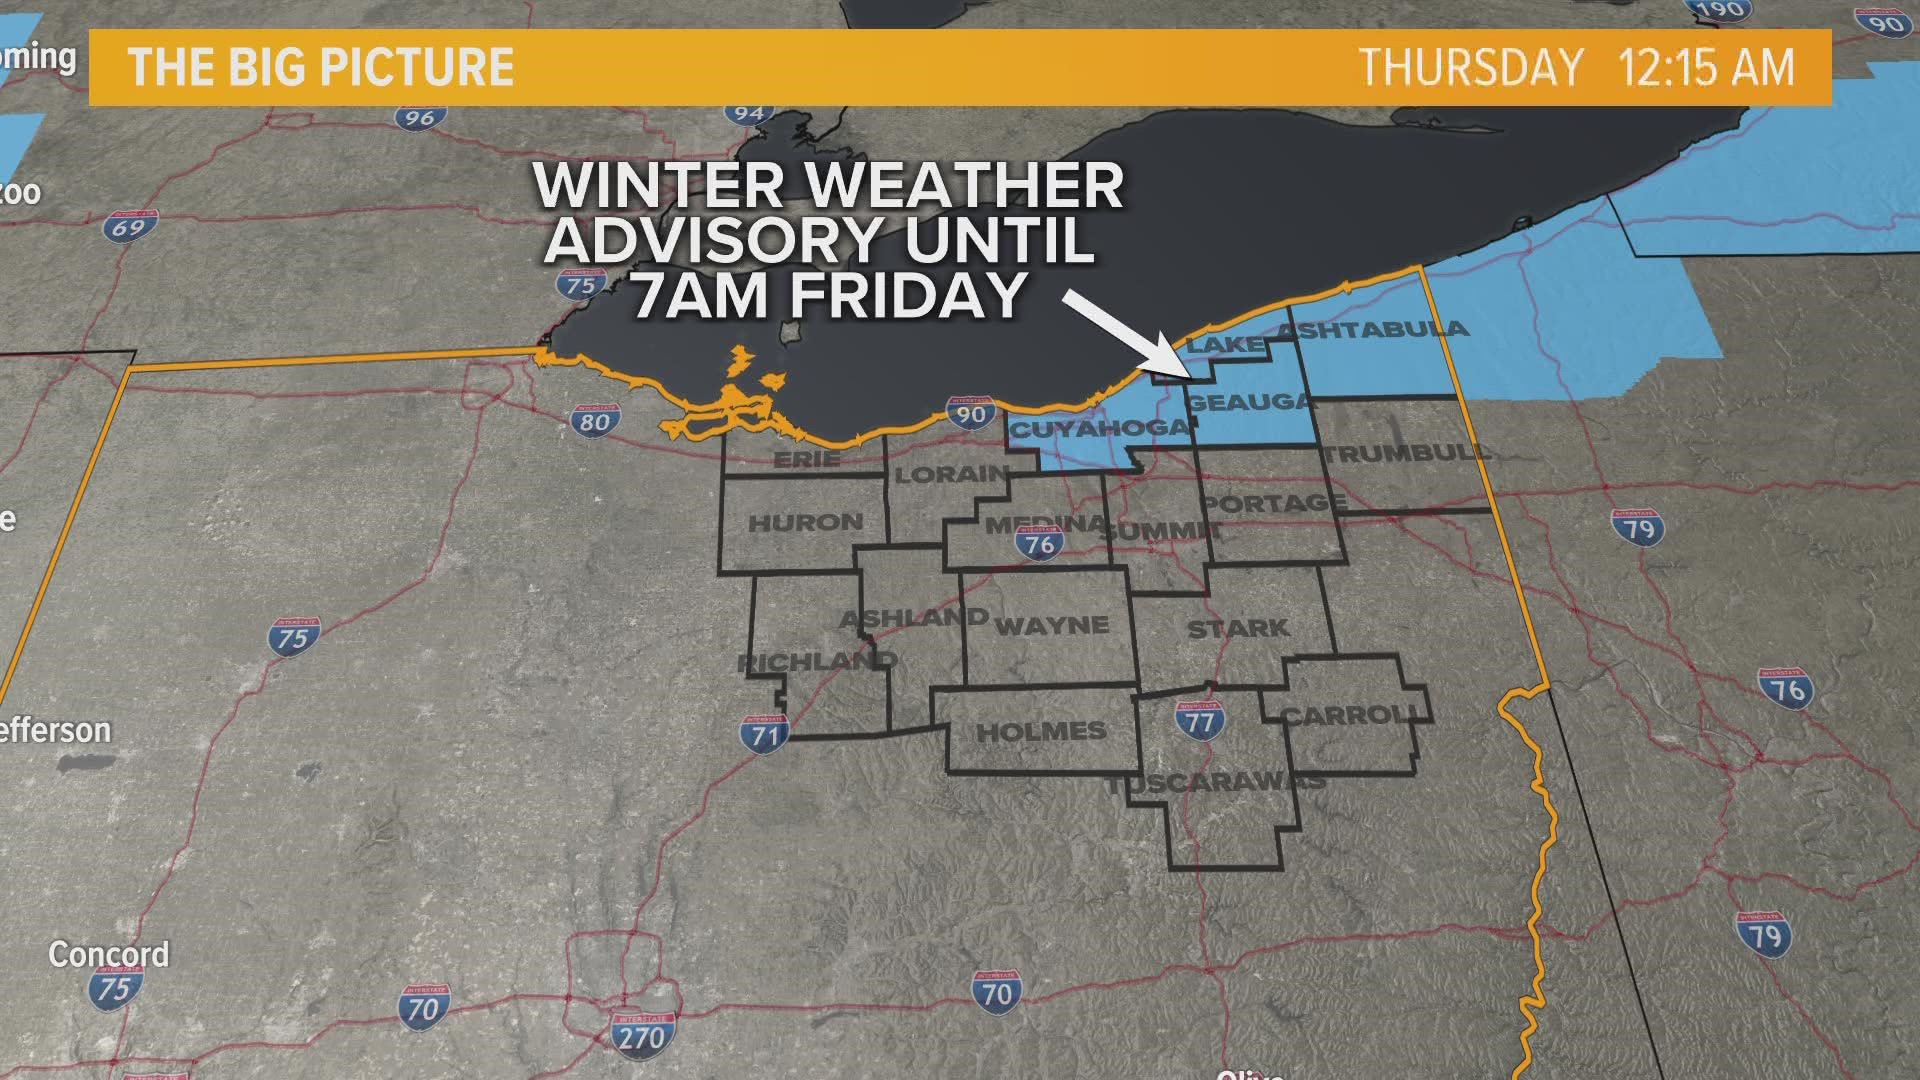 We're tracking lake effect snow. Here's what you can expected throughout the day ahead as some counties are under a Winter Weather Advisory.